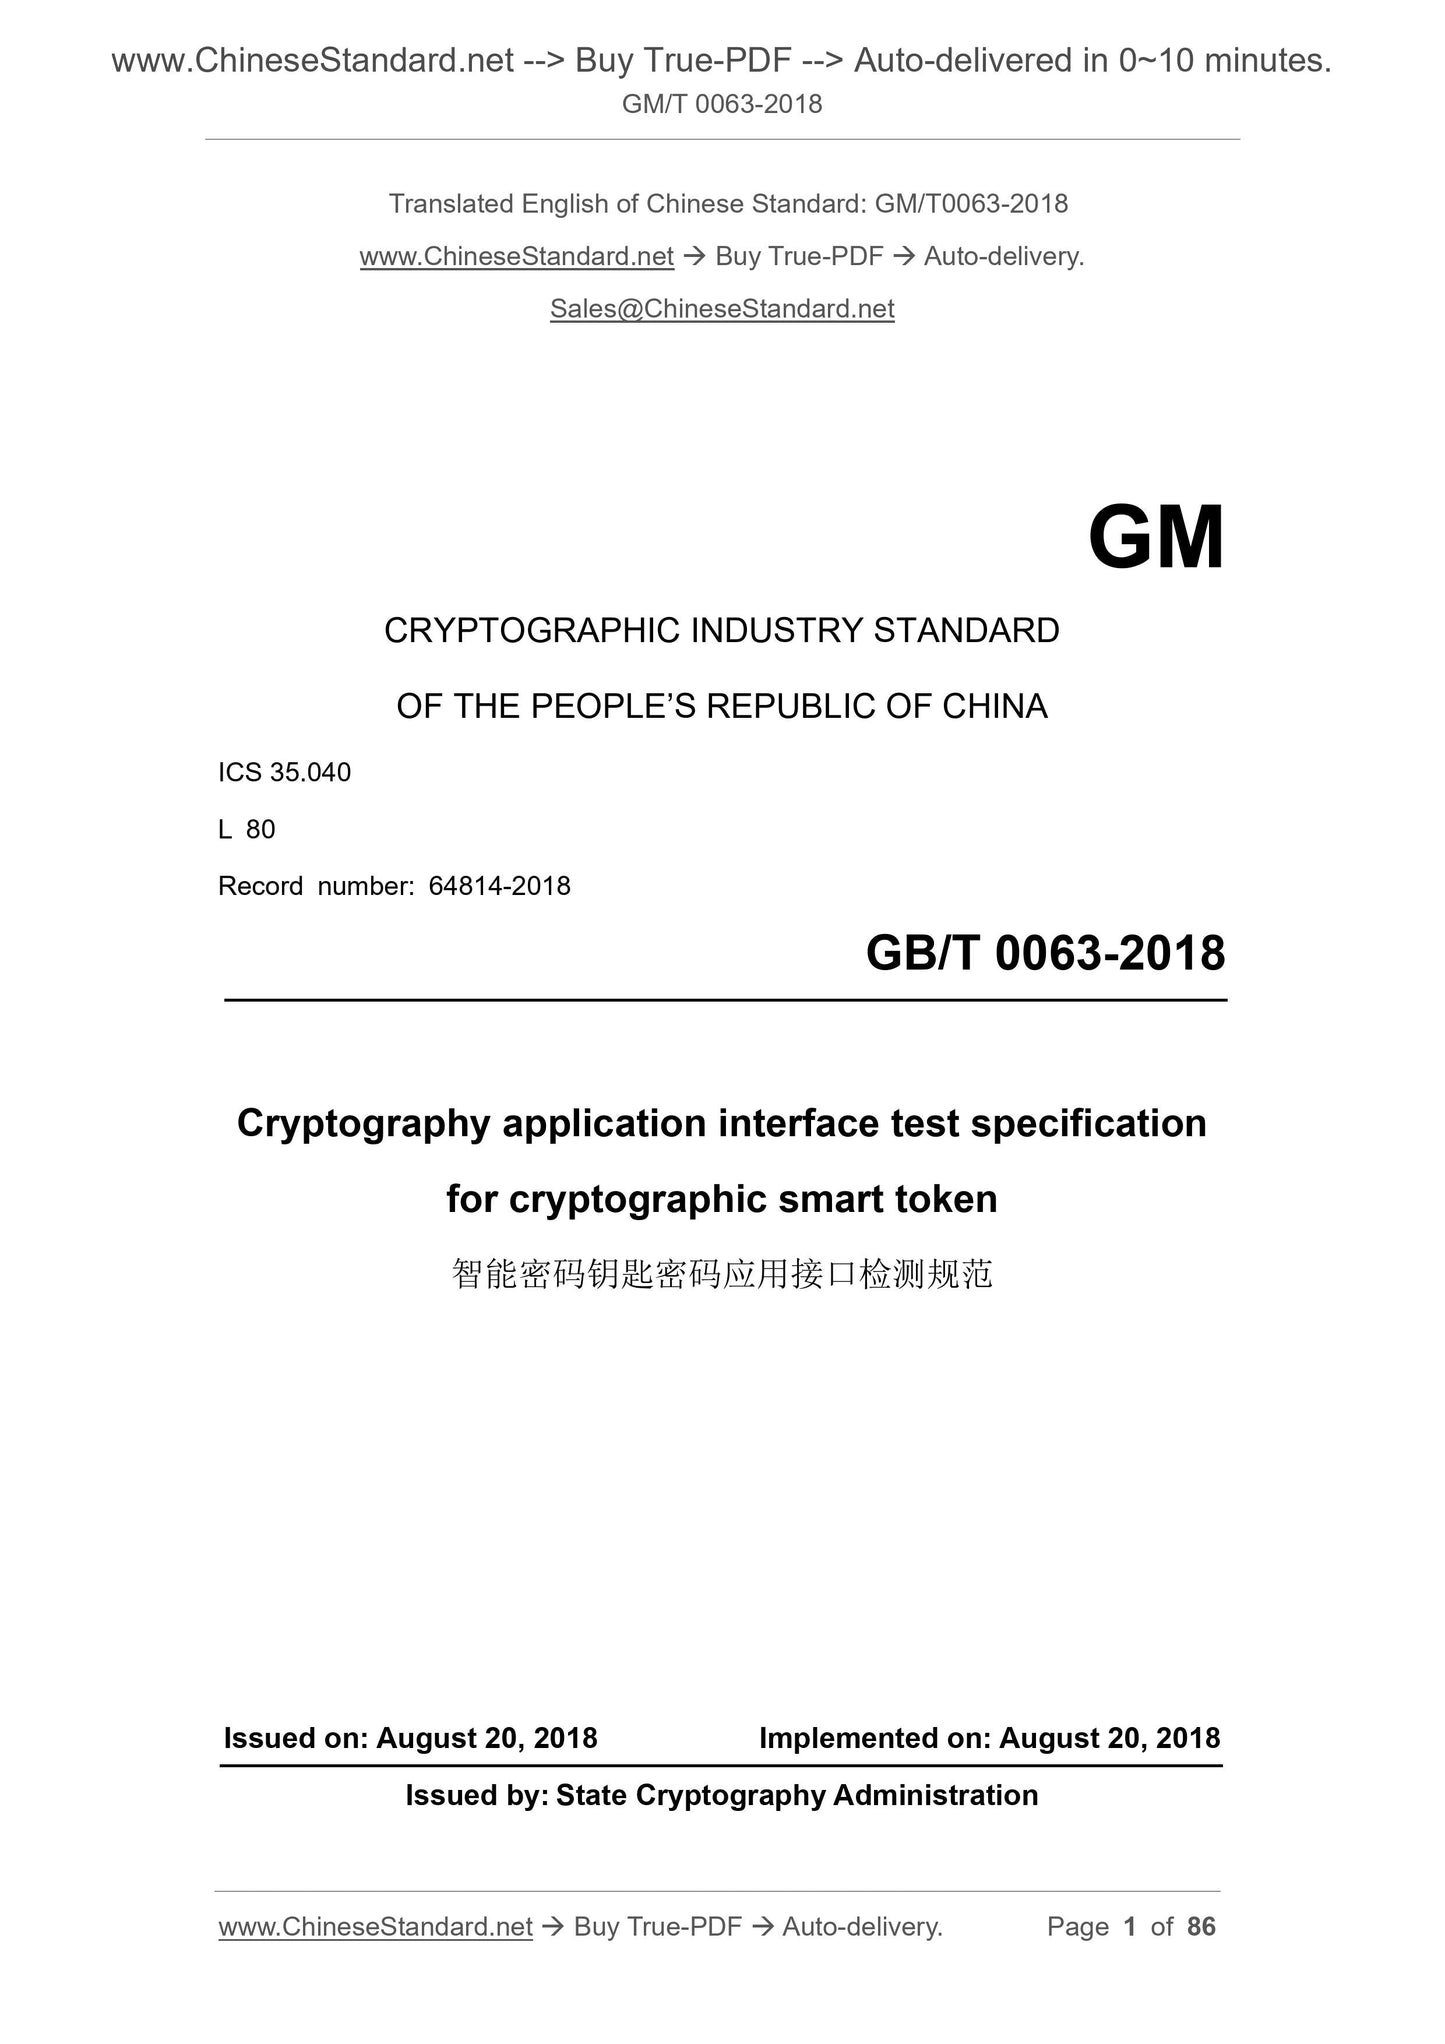 GM/T 0063-2018 Page 1